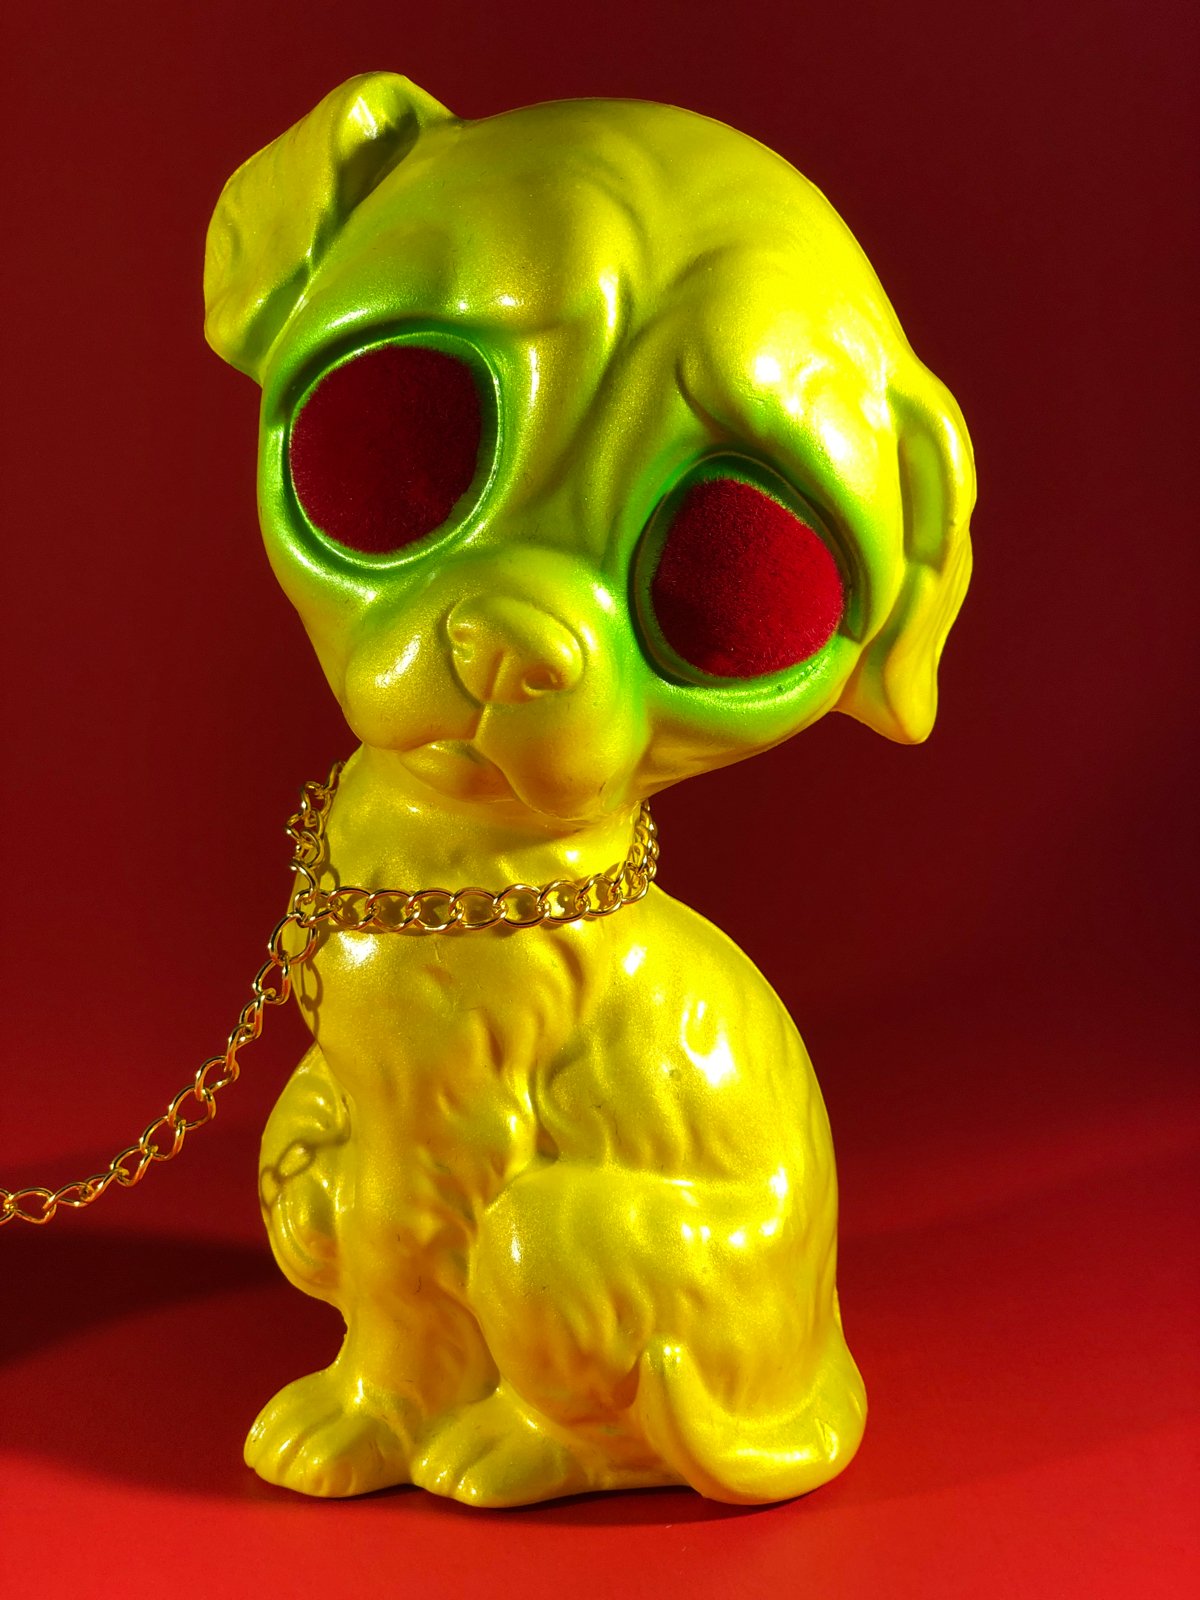 Sad dog, Sad cat chained together. Yellow and green with red flocked eyes